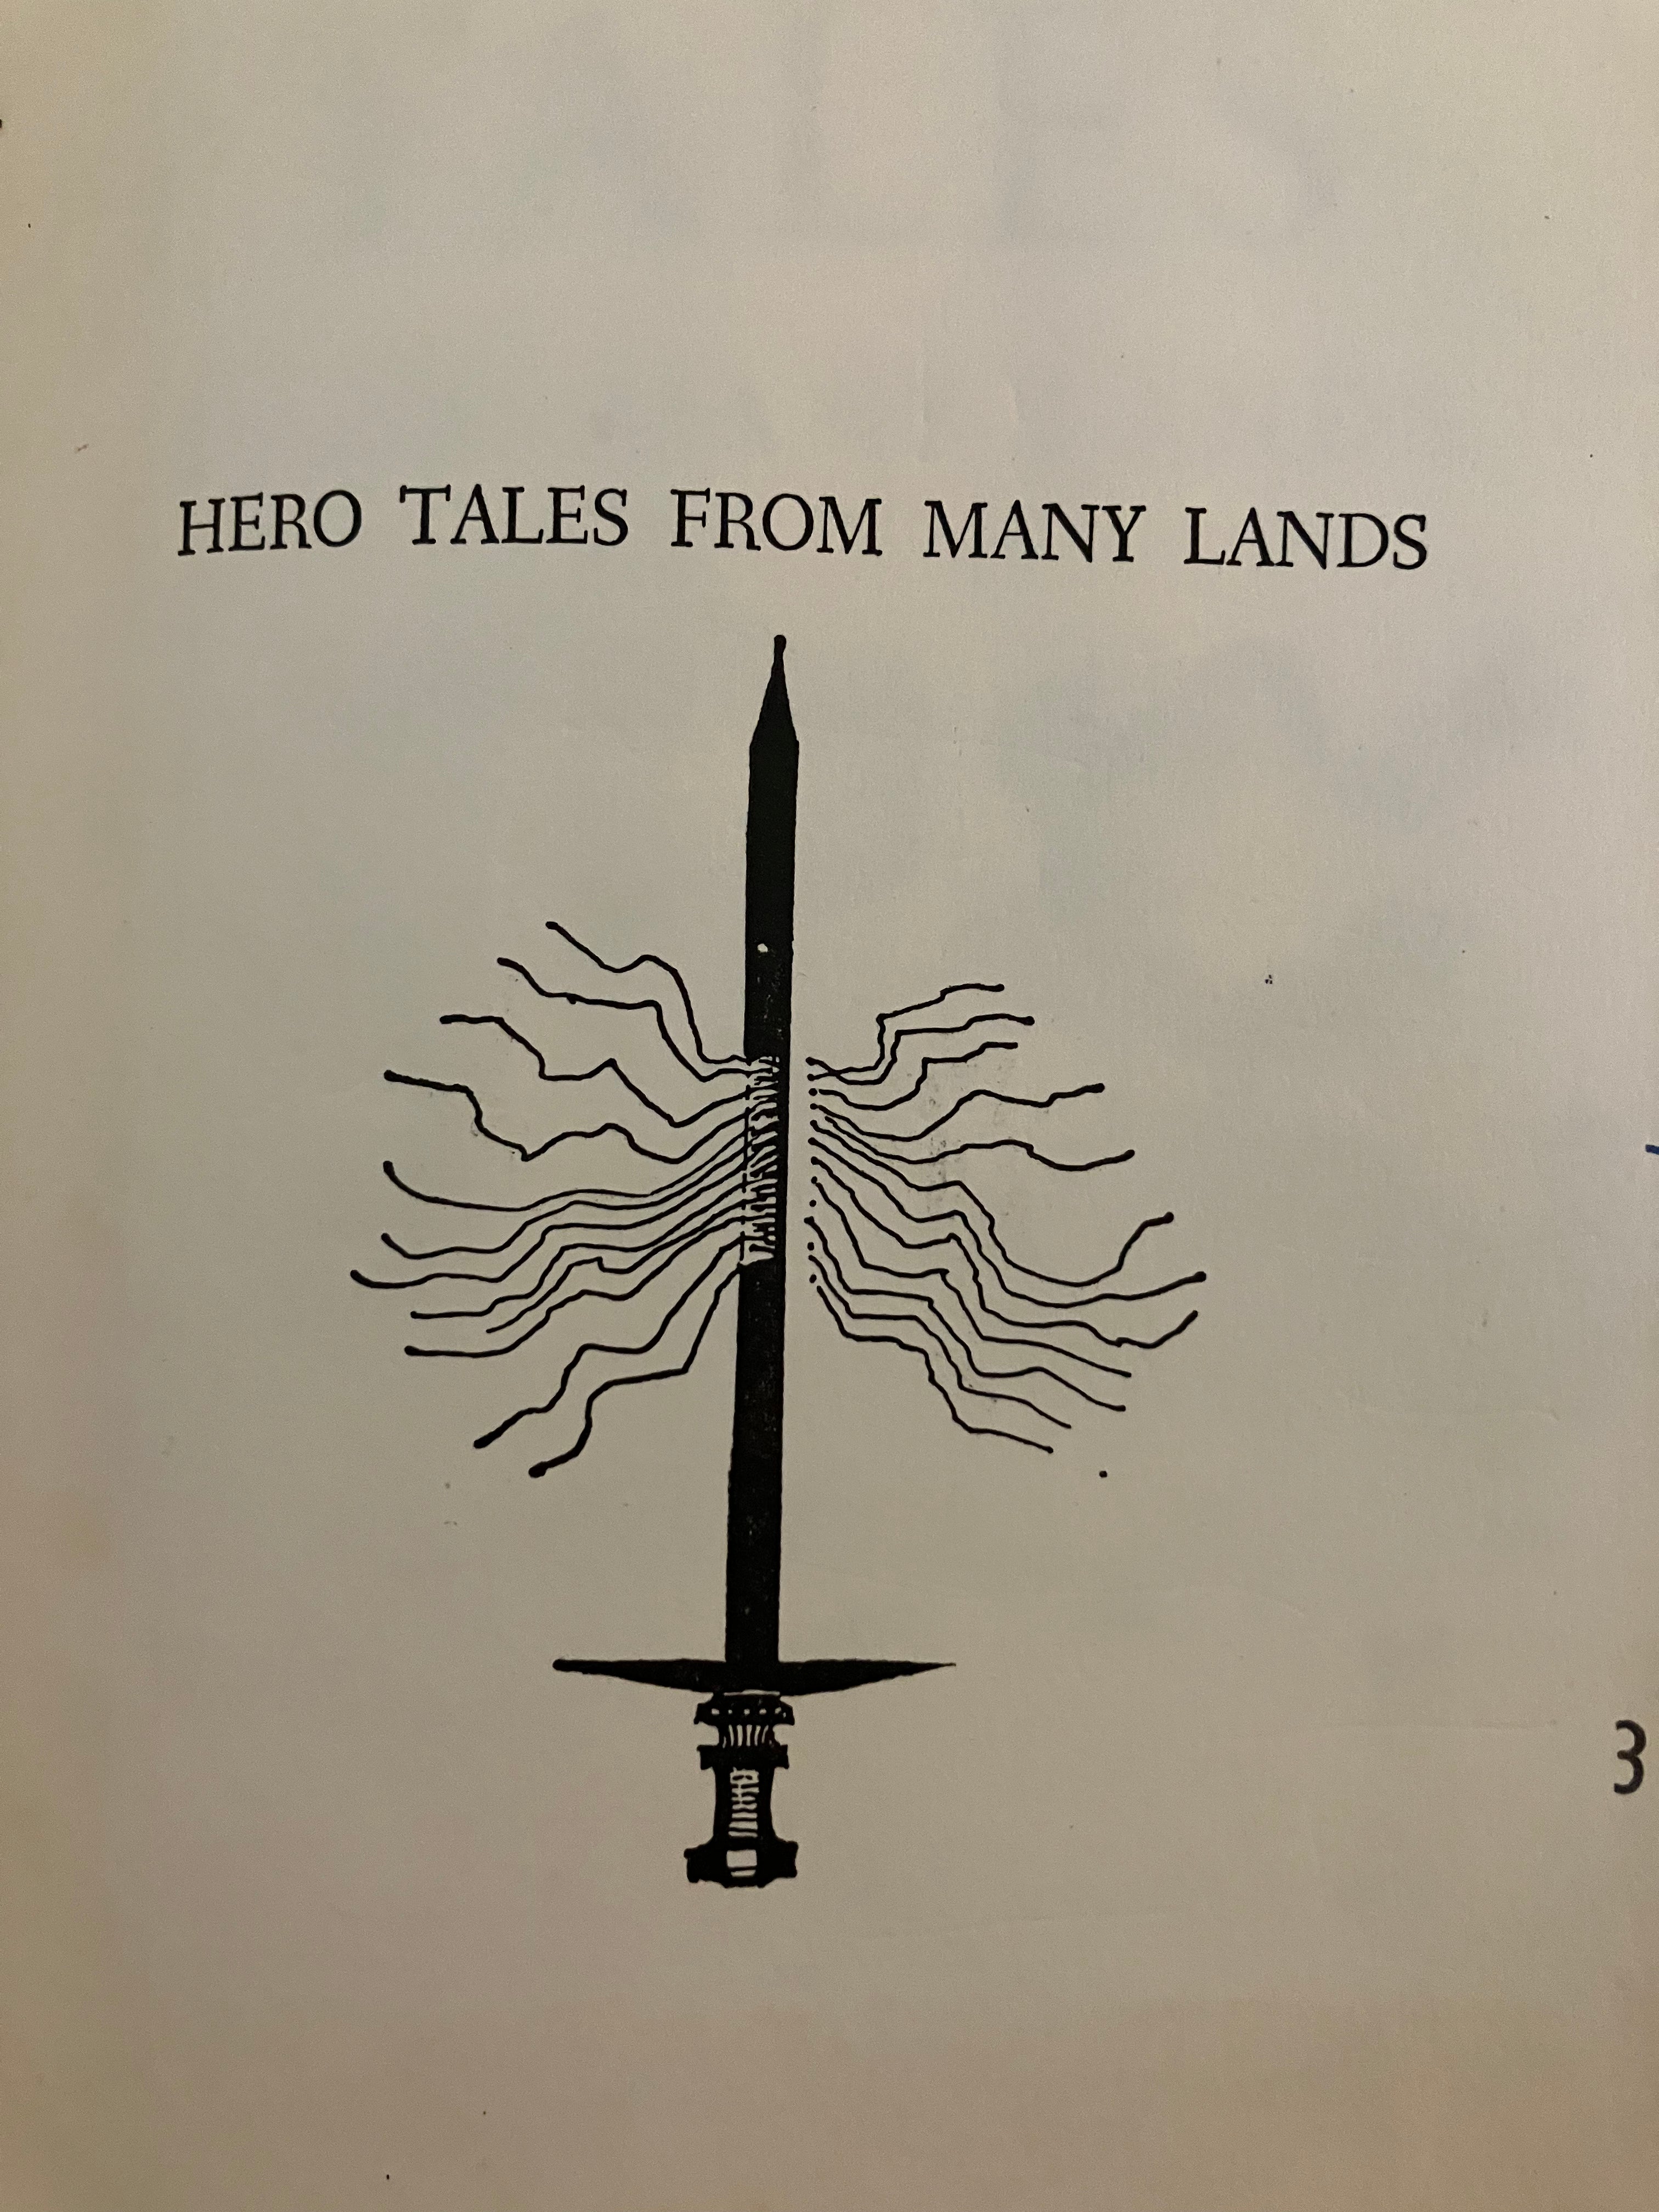 Hero Tales from Many Lands